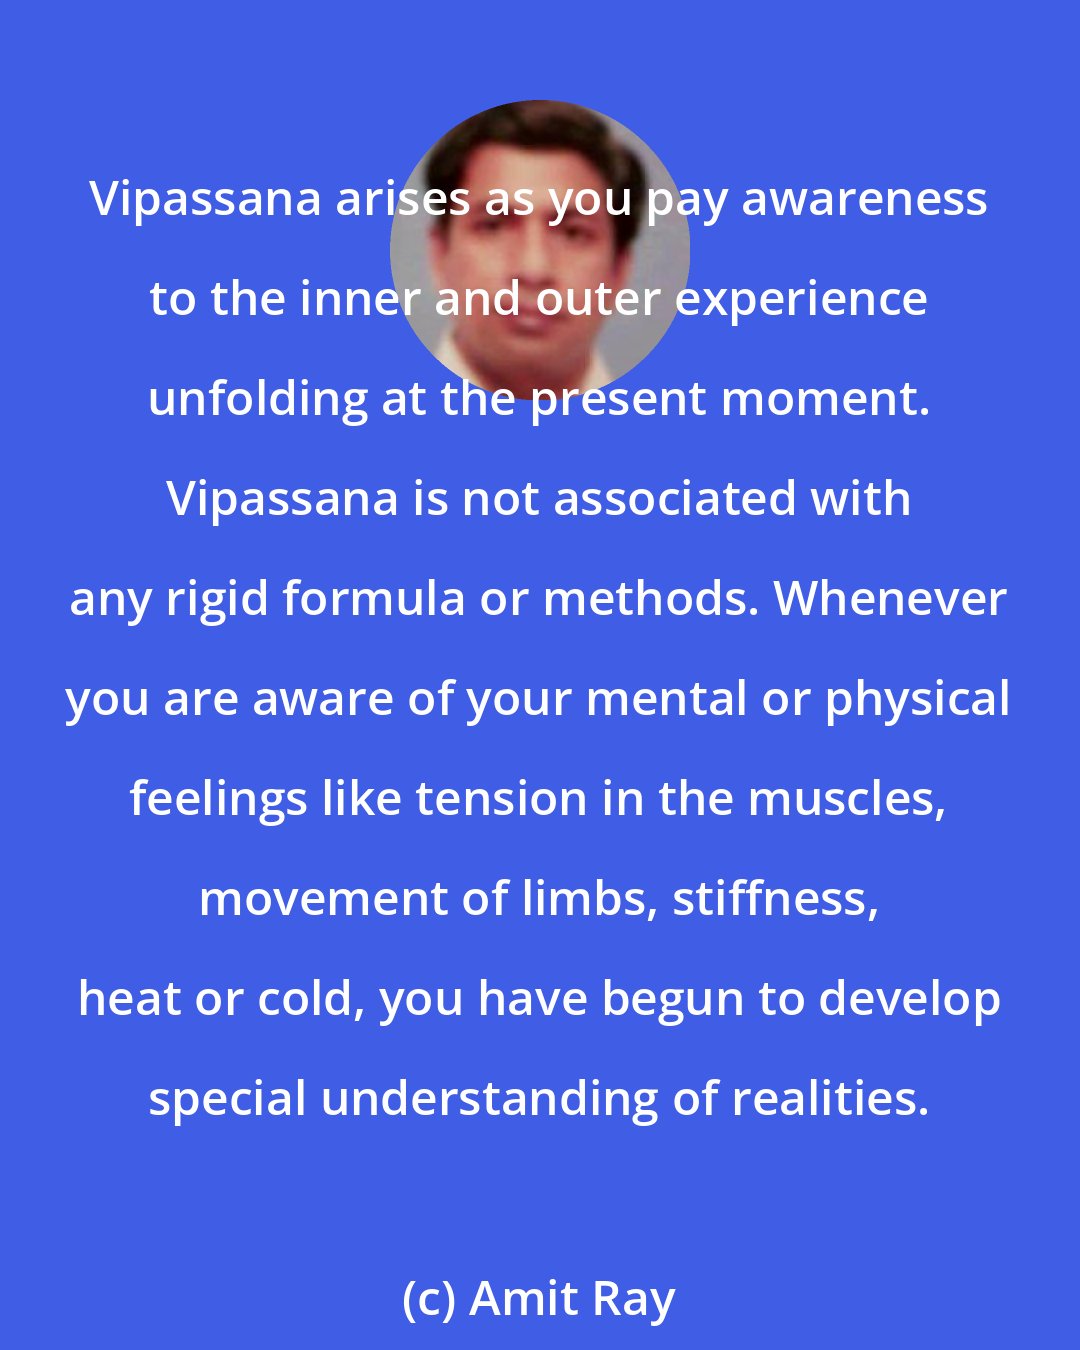 Amit Ray: Vipassana arises as you pay awareness to the inner and outer experience unfolding at the present moment. Vipassana is not associated with any rigid formula or methods. Whenever you are aware of your mental or physical feelings like tension in the muscles, movement of limbs, stiffness, heat or cold, you have begun to develop special understanding of realities.